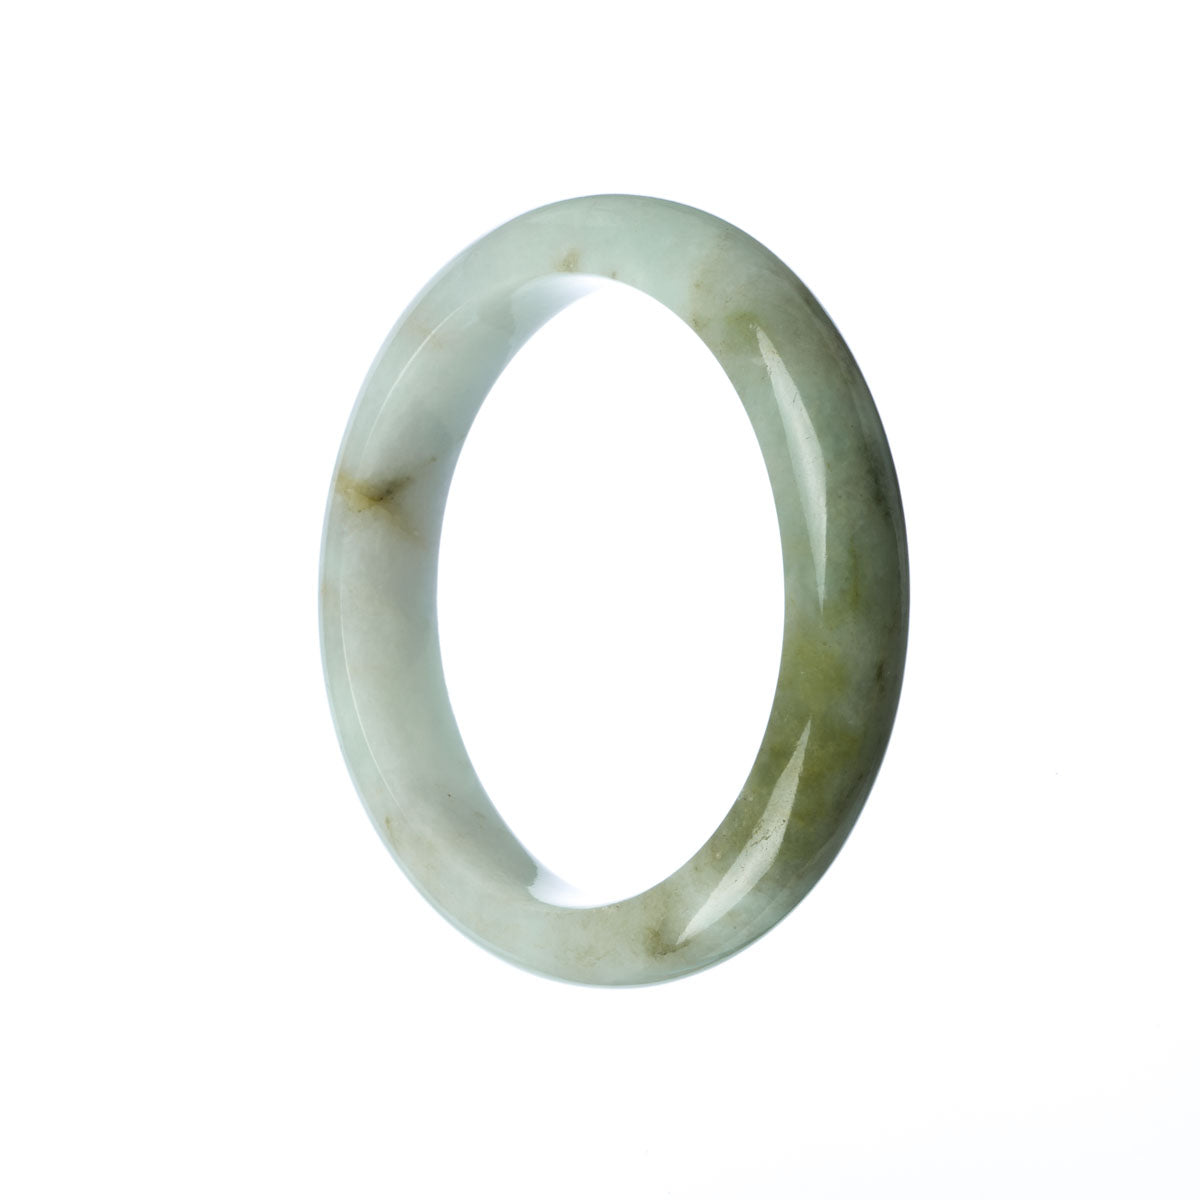 A beautiful white and green jadeite bracelet with a half moon design, perfect for adding a touch of elegance to any outfit.